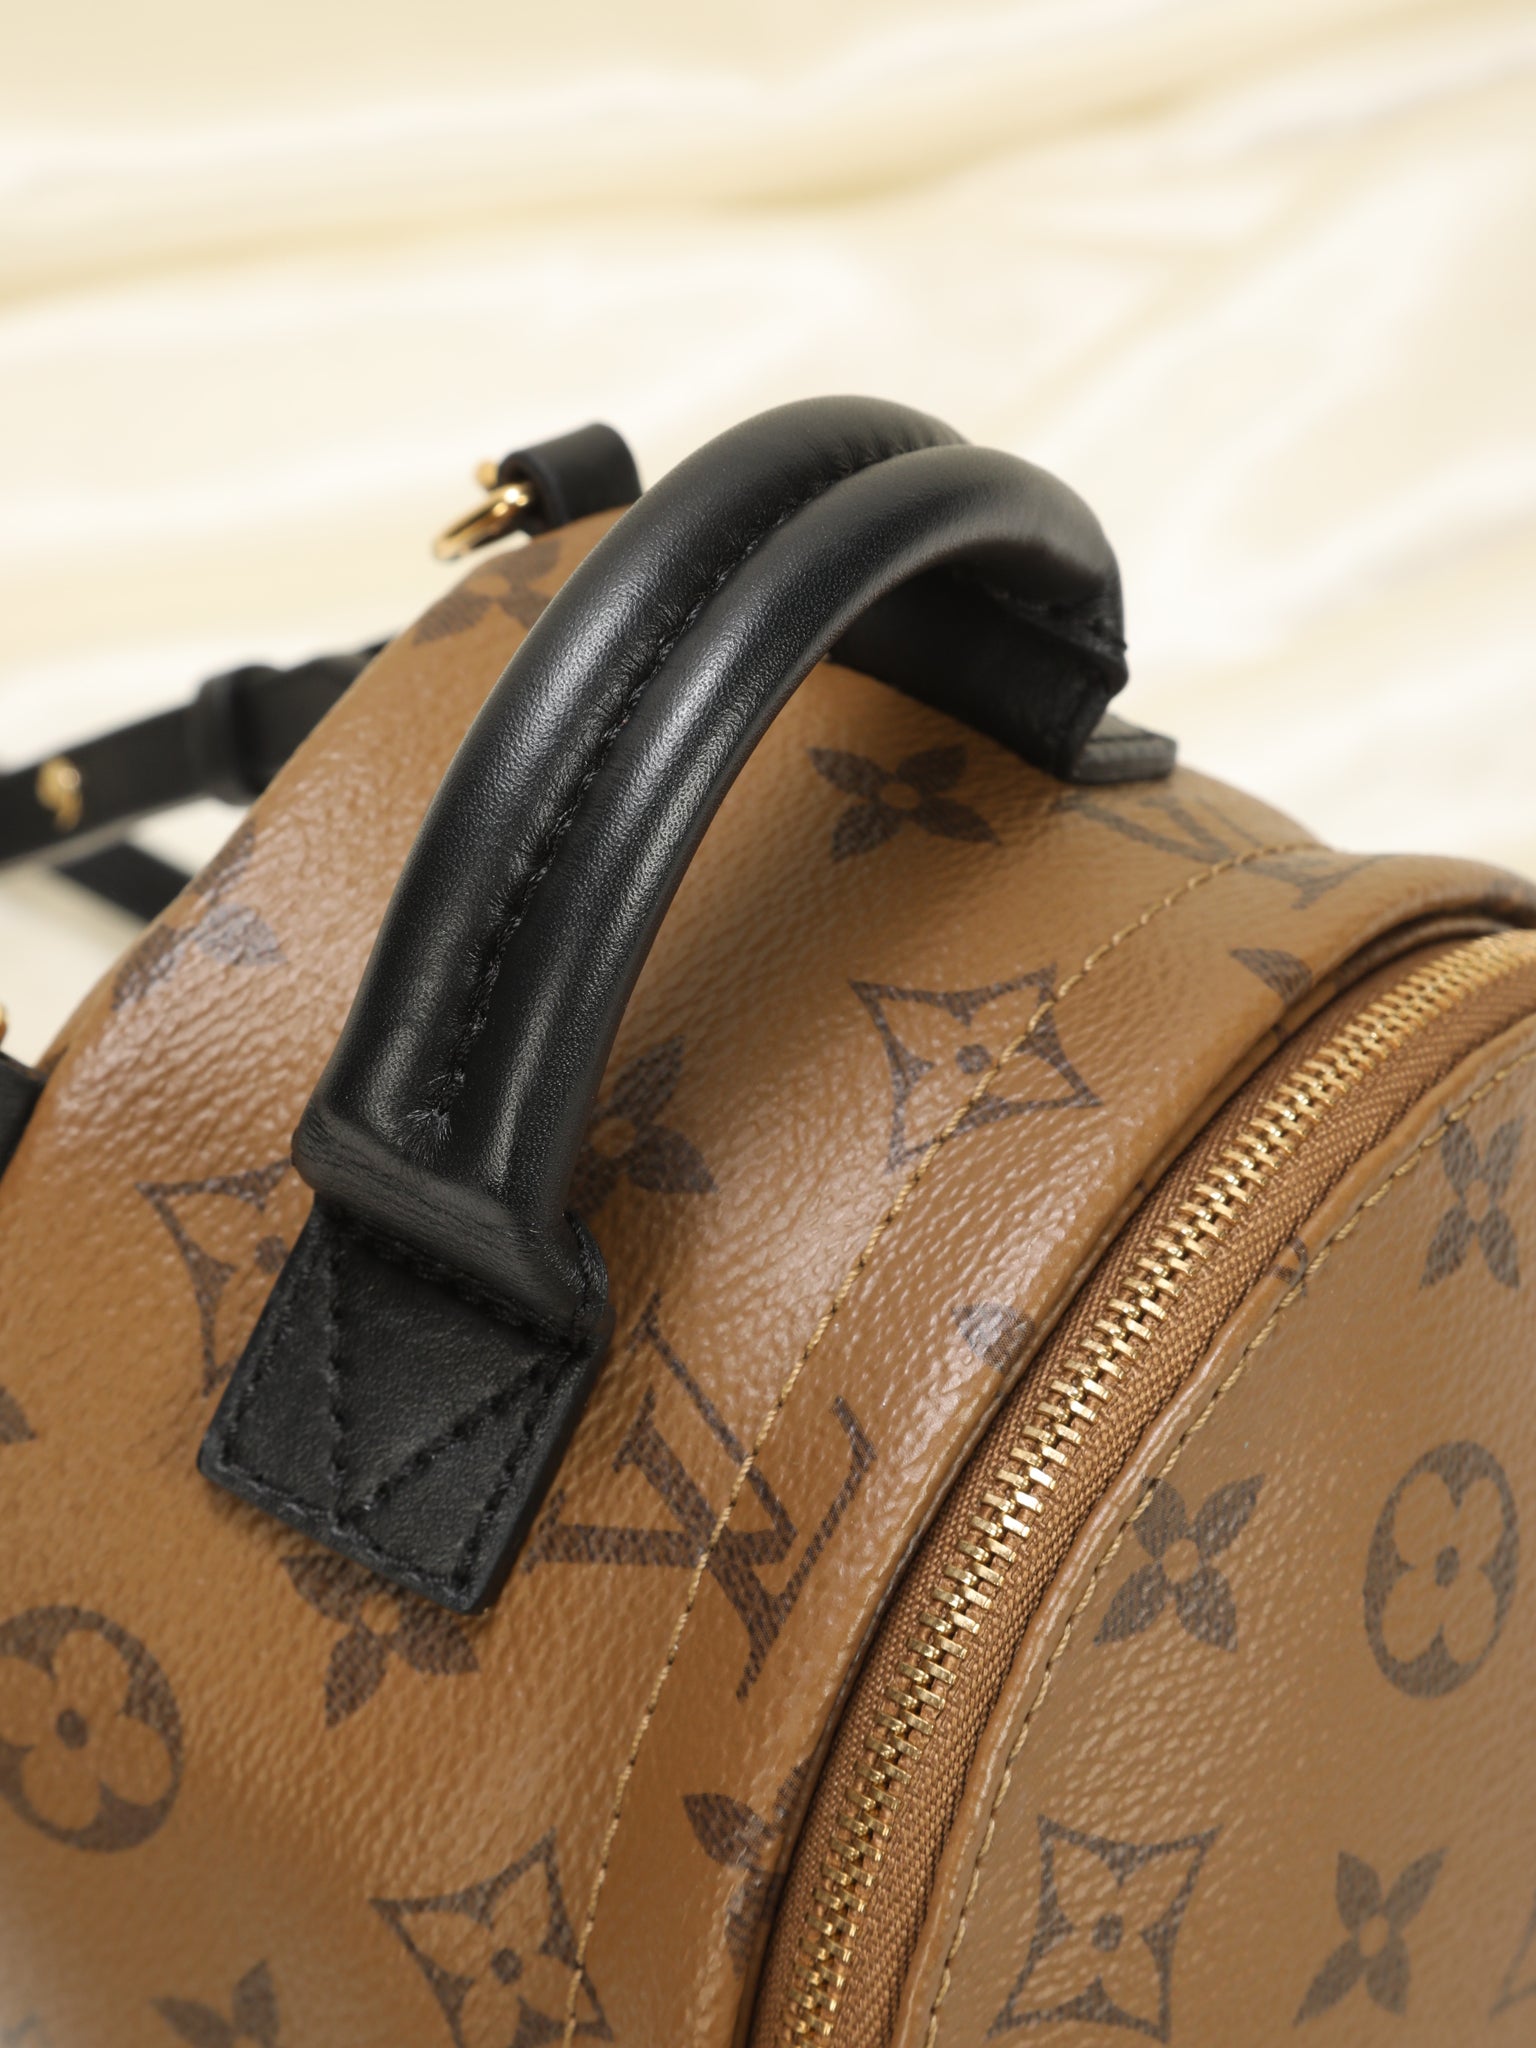 Louis Vuitton Palm Springs Reverse PM Backpack – Bagaholic